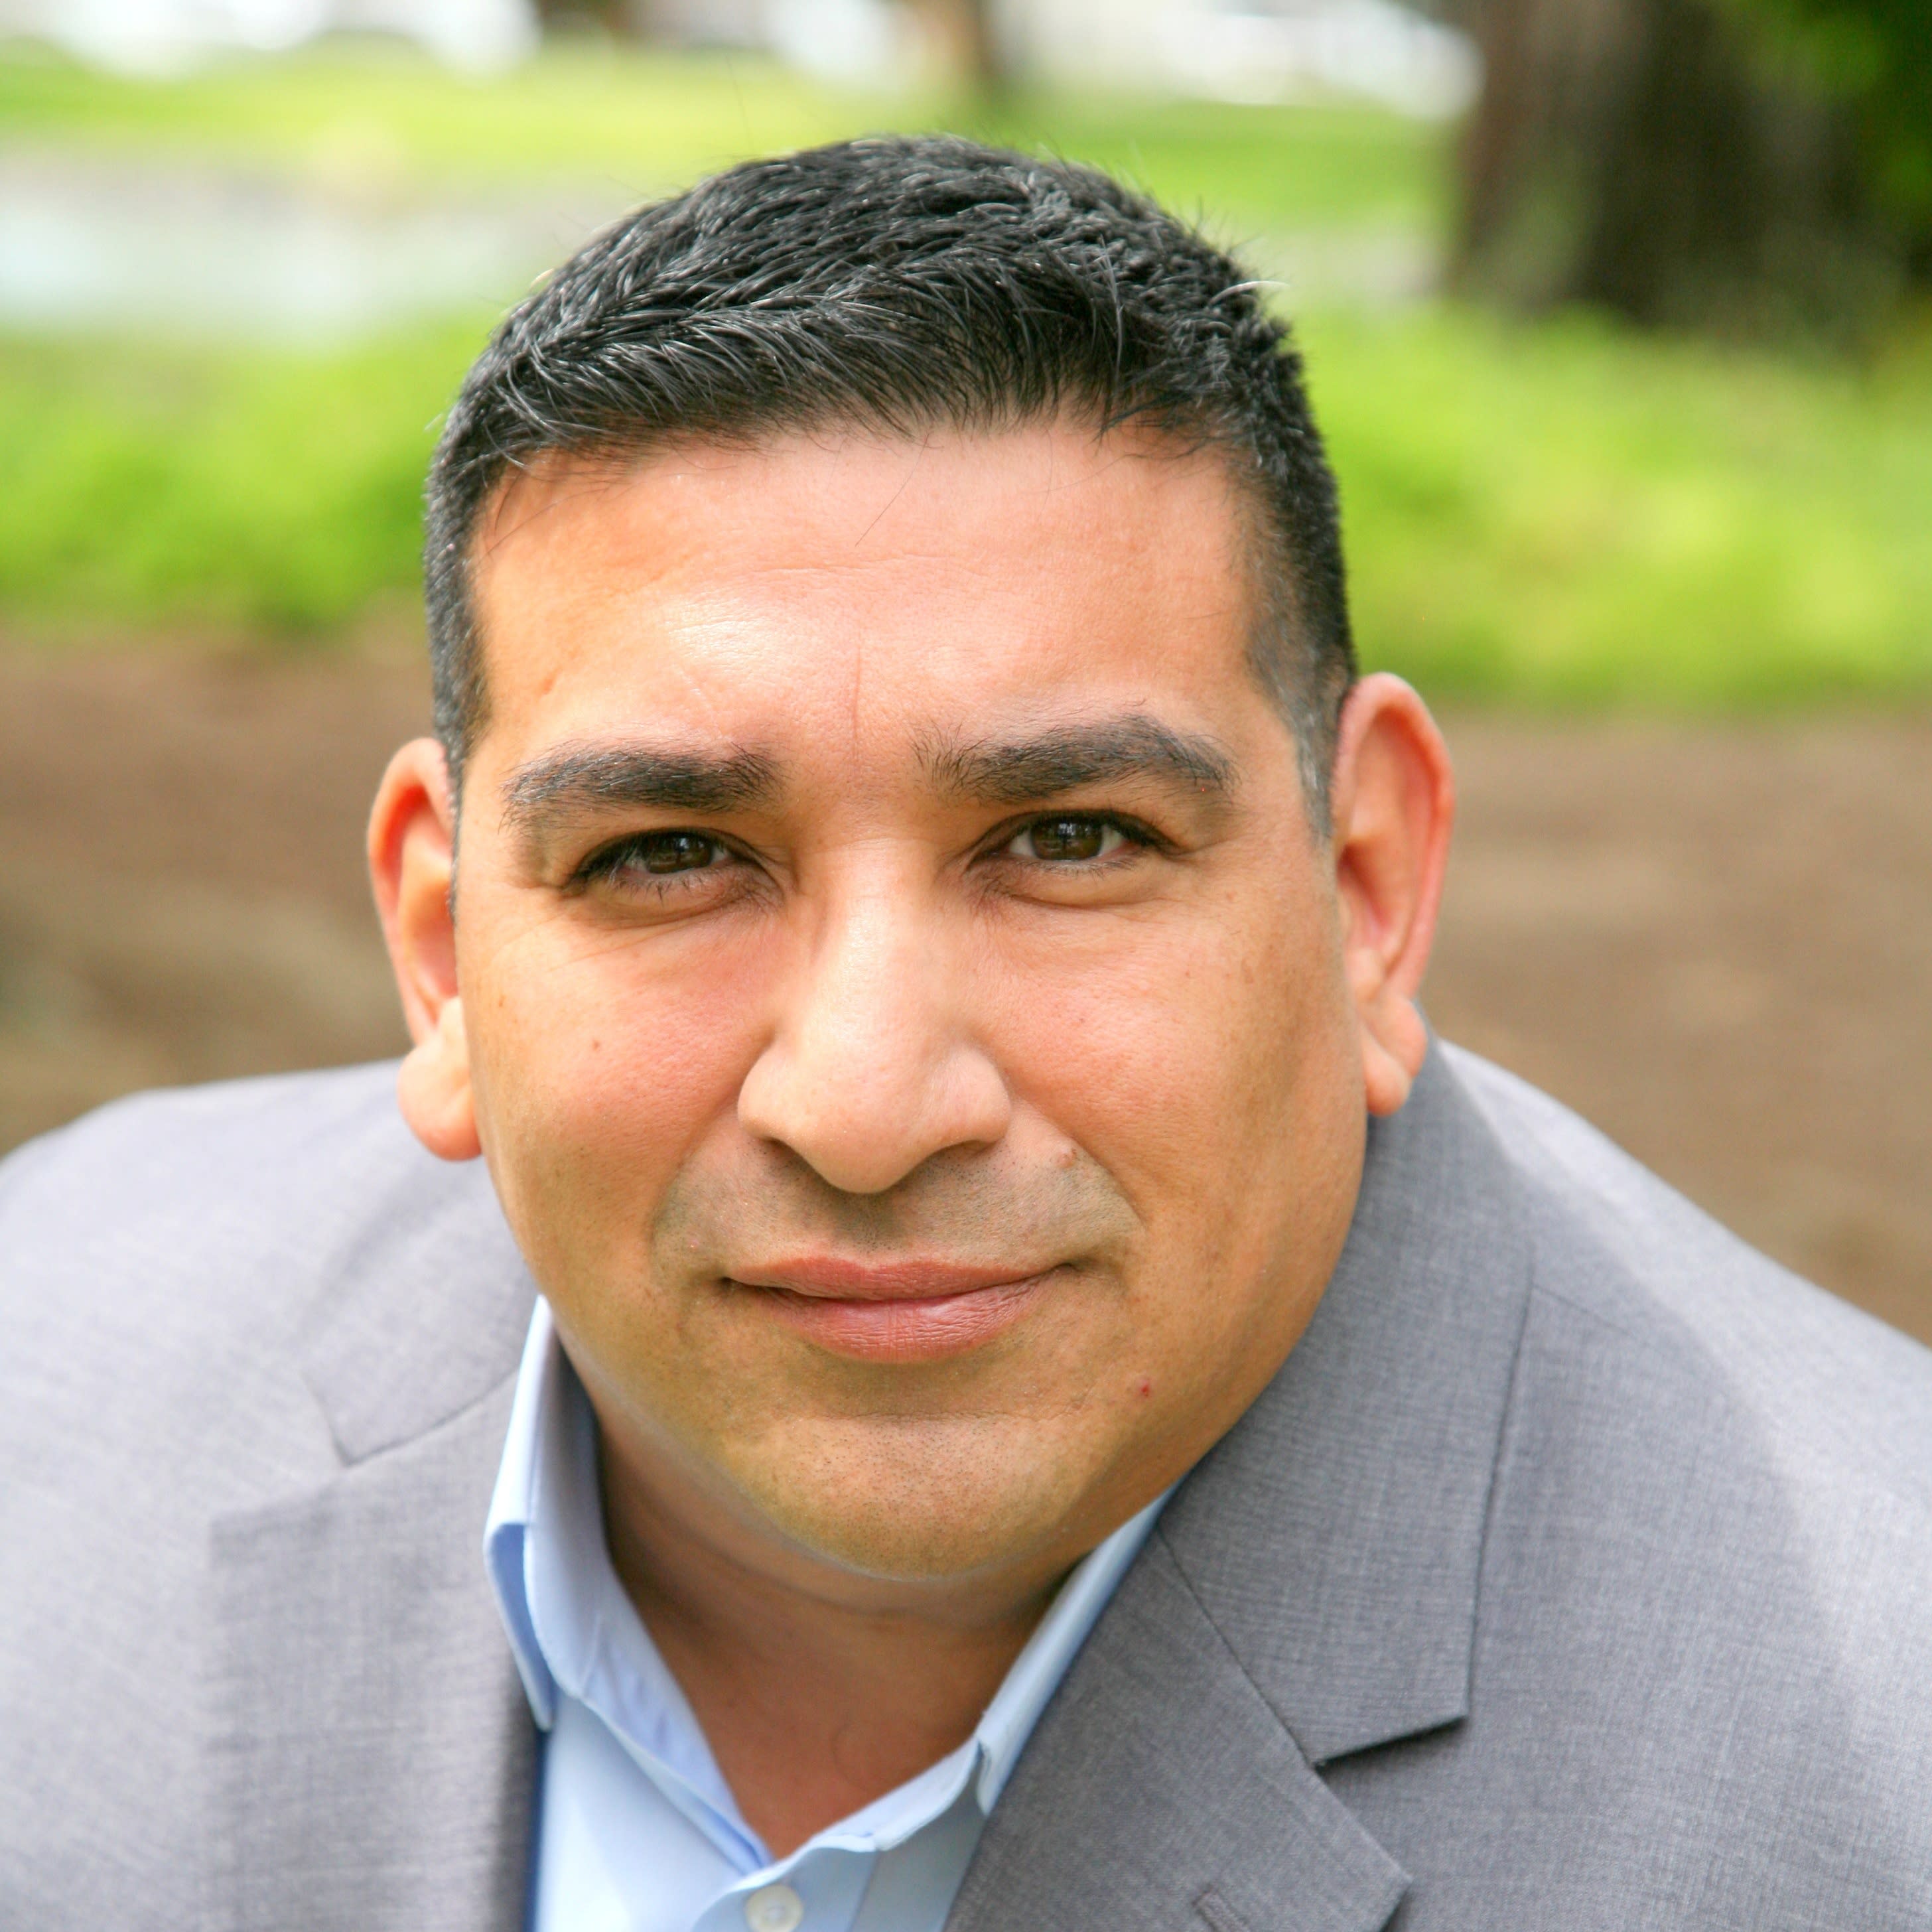 Frankie Rositas, Real Estate Agent, Profile Photo, exp REALTY,  August 4 2021